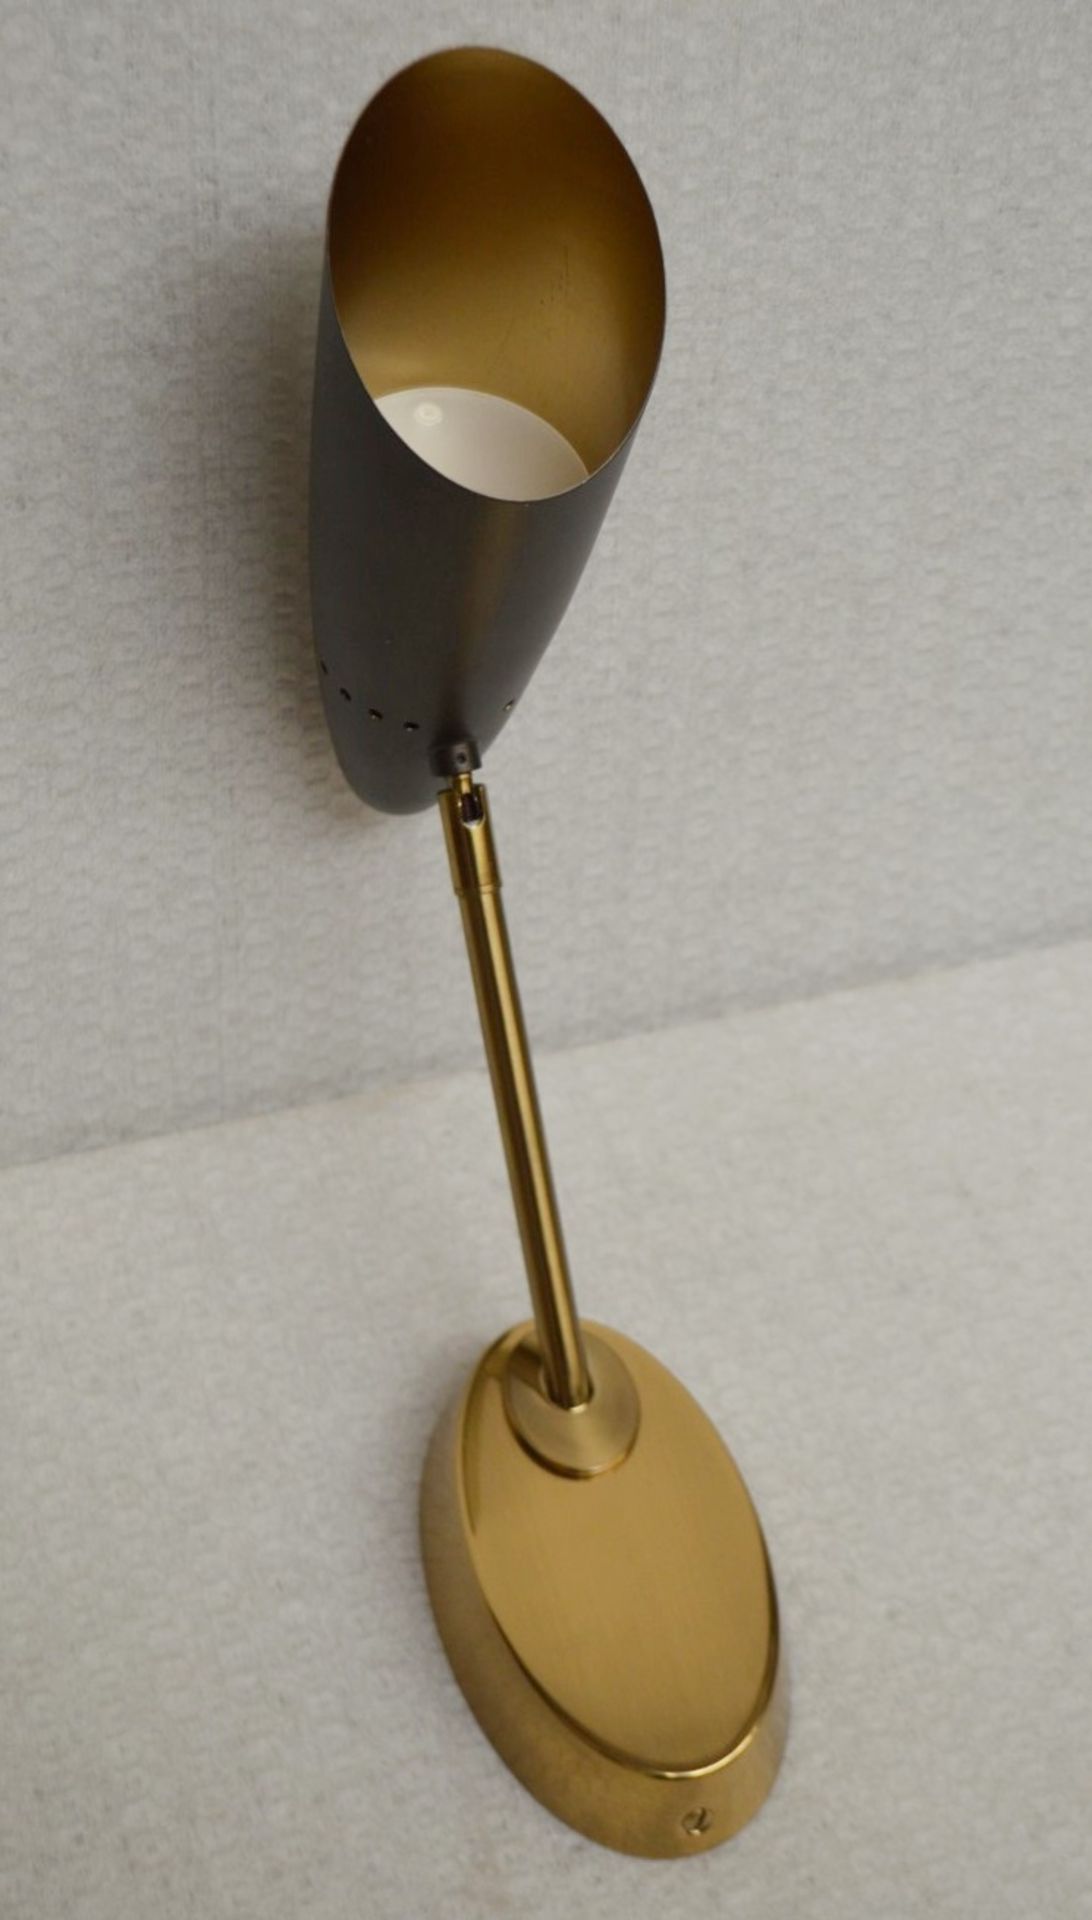 1 x CHELSOM Retro Styled Wall Light In Polished Brass And Back Bronze Finish - Unused Unboxed - Image 4 of 6